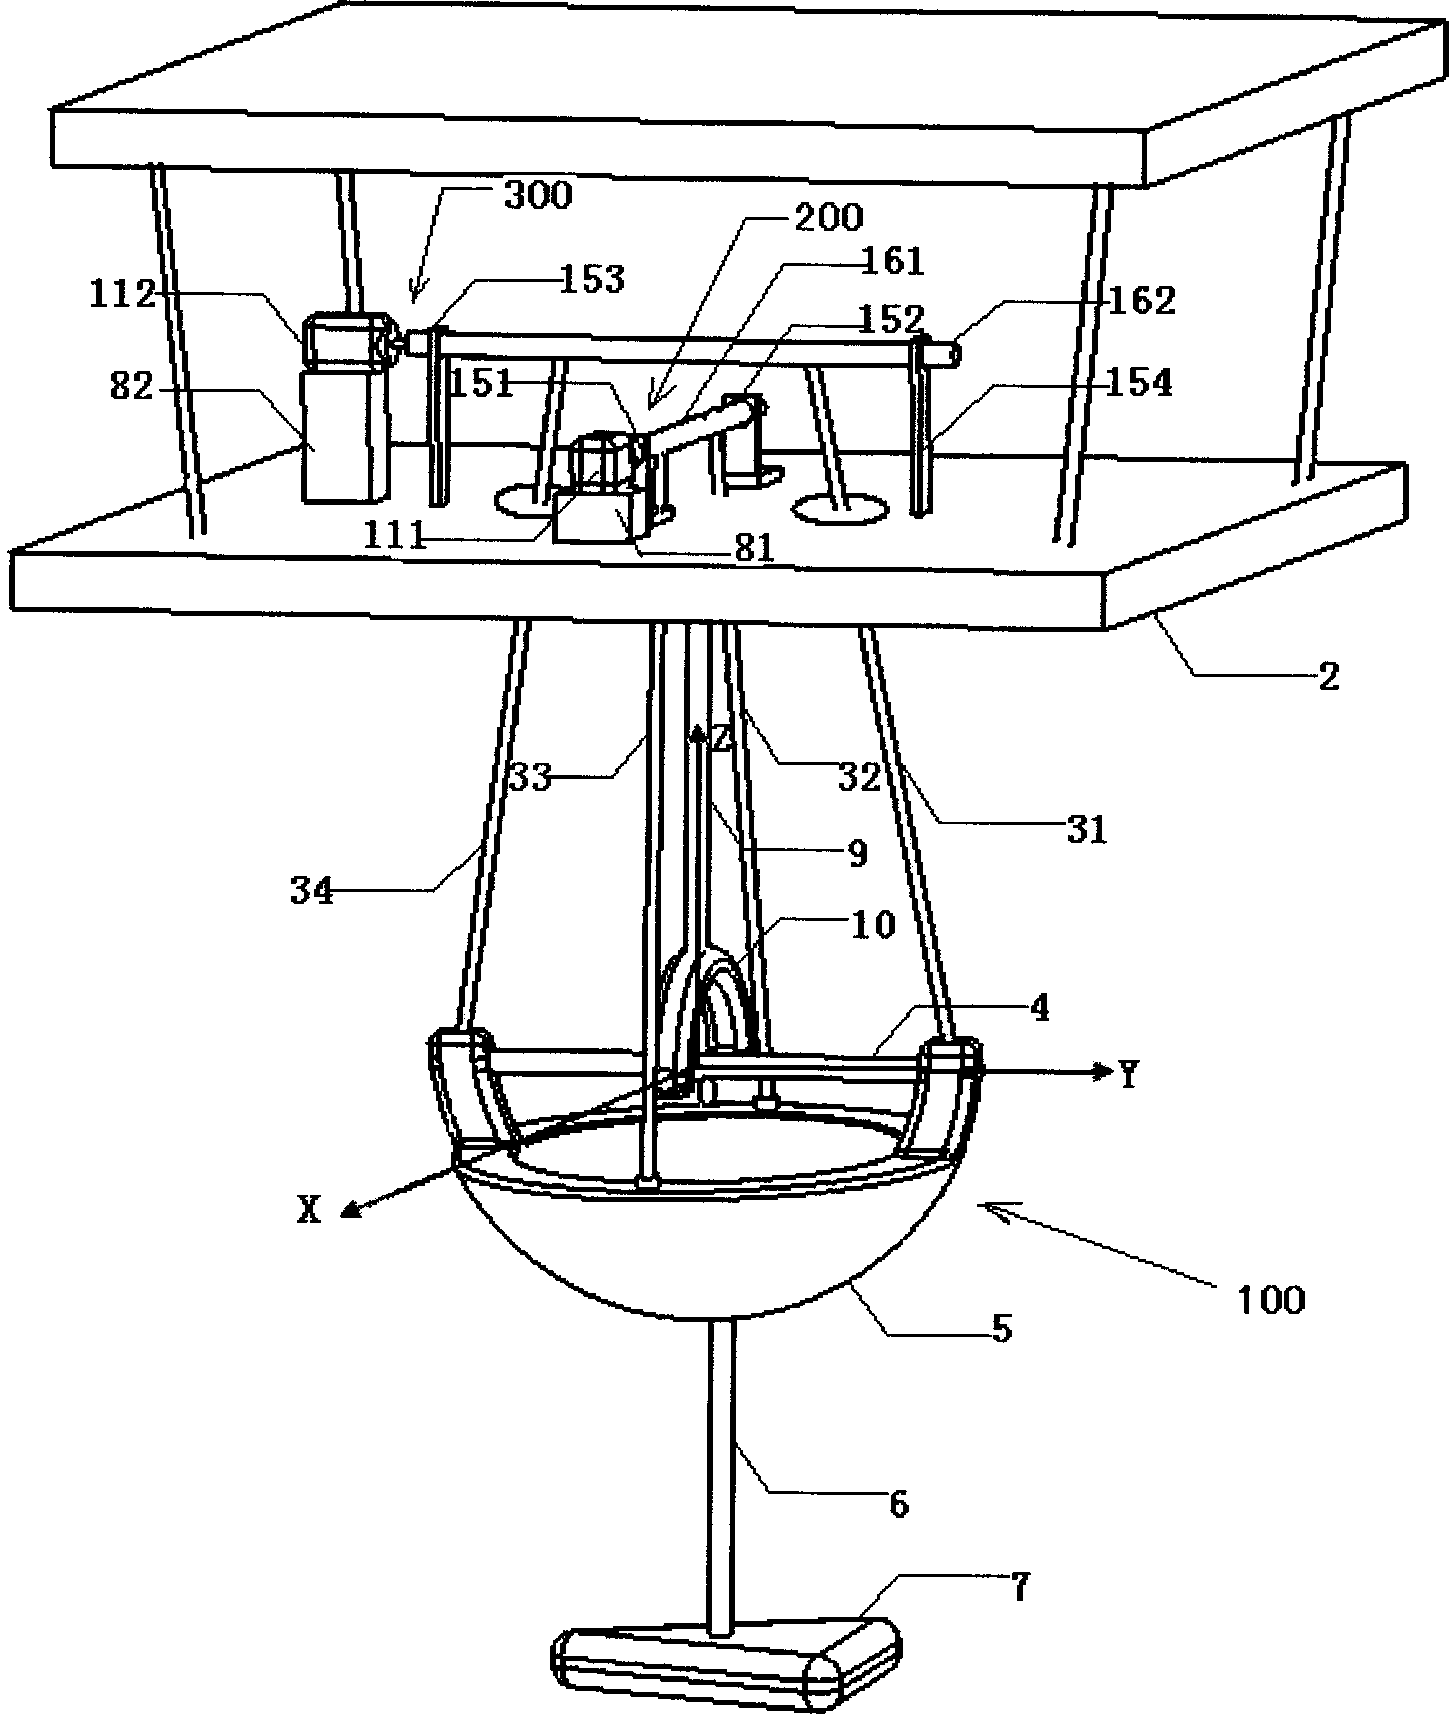 Wind tunnel model supporting device